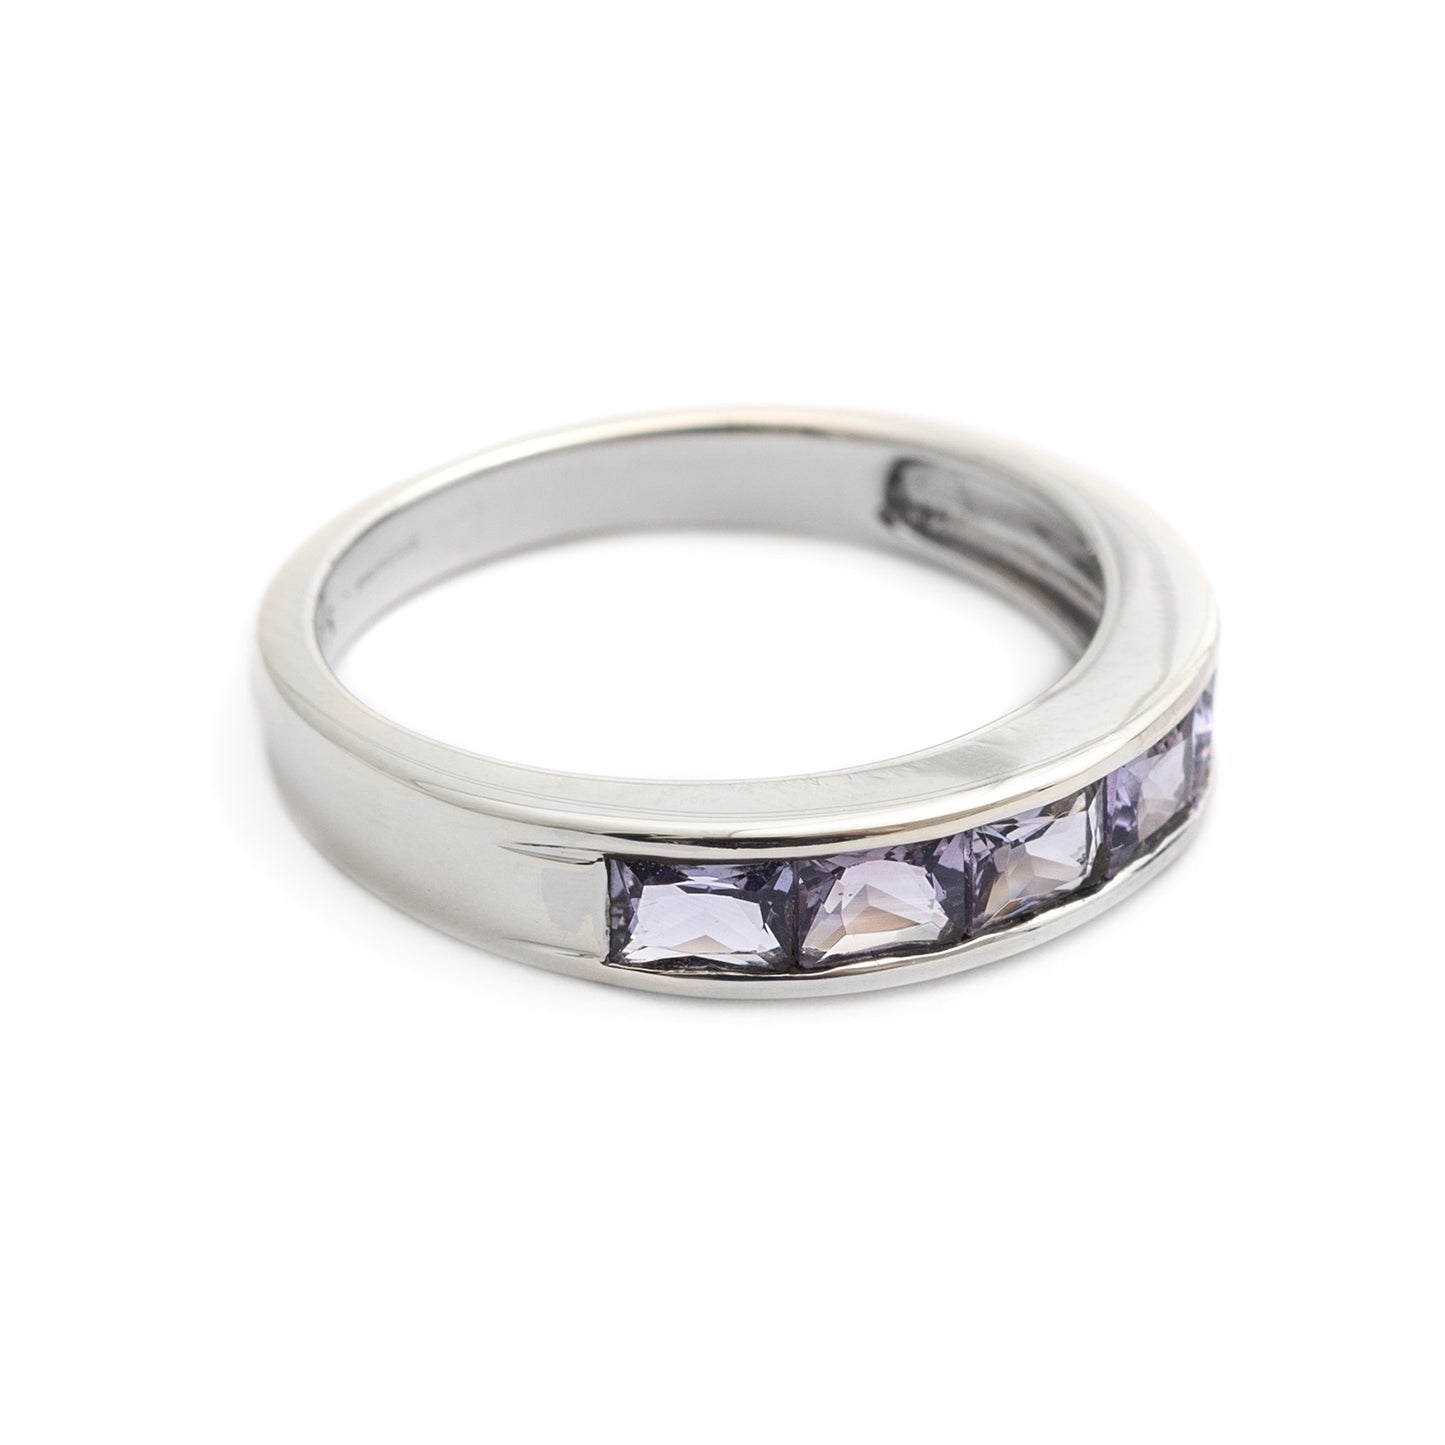 9ct White Gold Channel Set Ring with Five Cut Pleochroic Iolites UK Size O (Code A289)